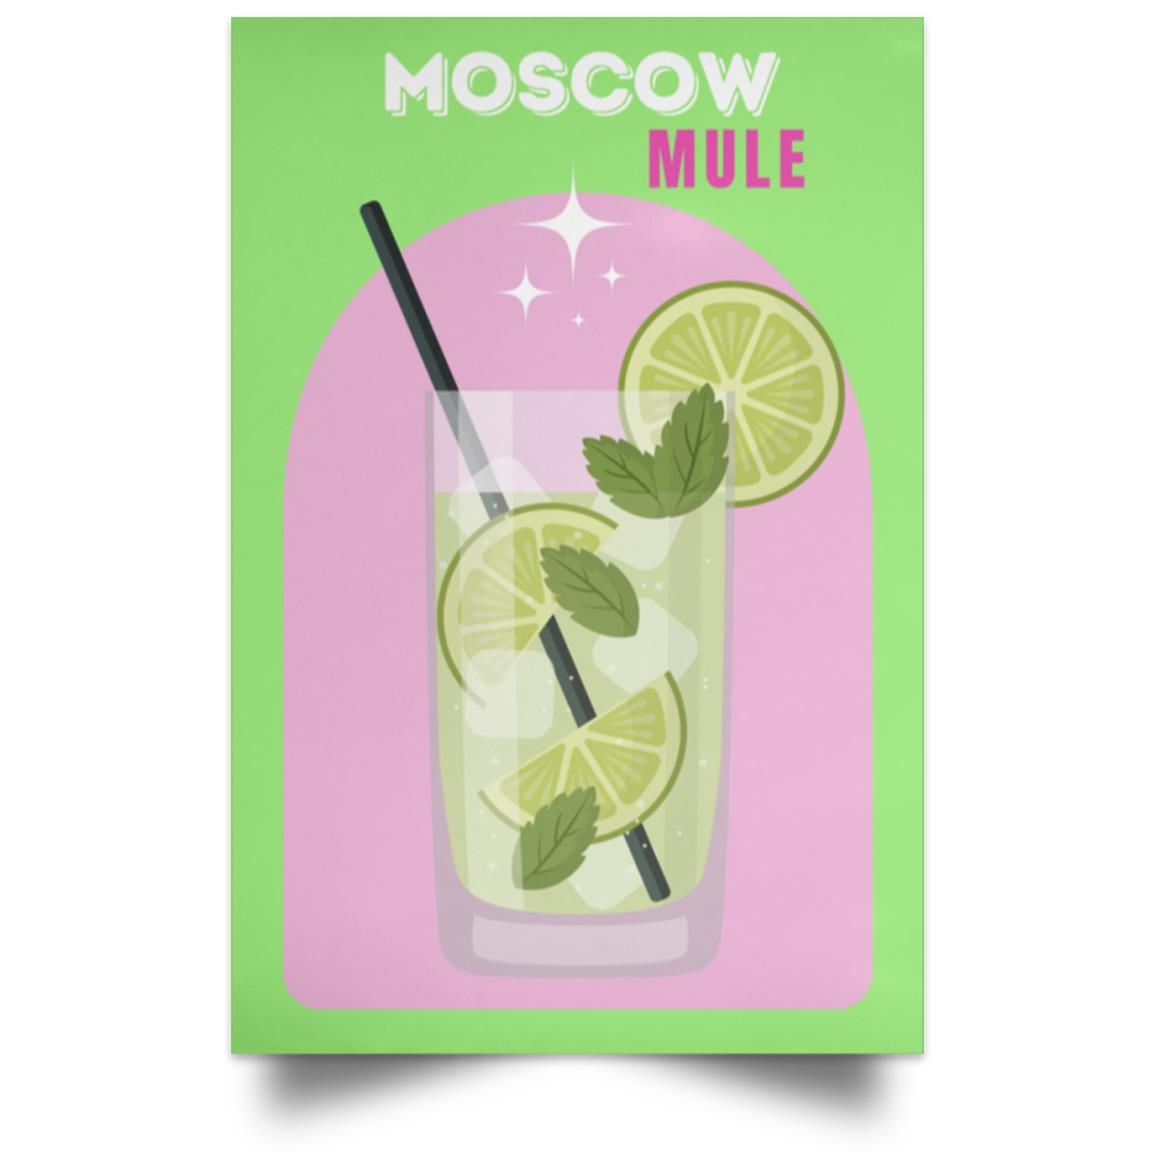 Get trendy with moscow mule moscow Mule - Housewares available at Good Gift Company. Grab yours for $6.75 today!